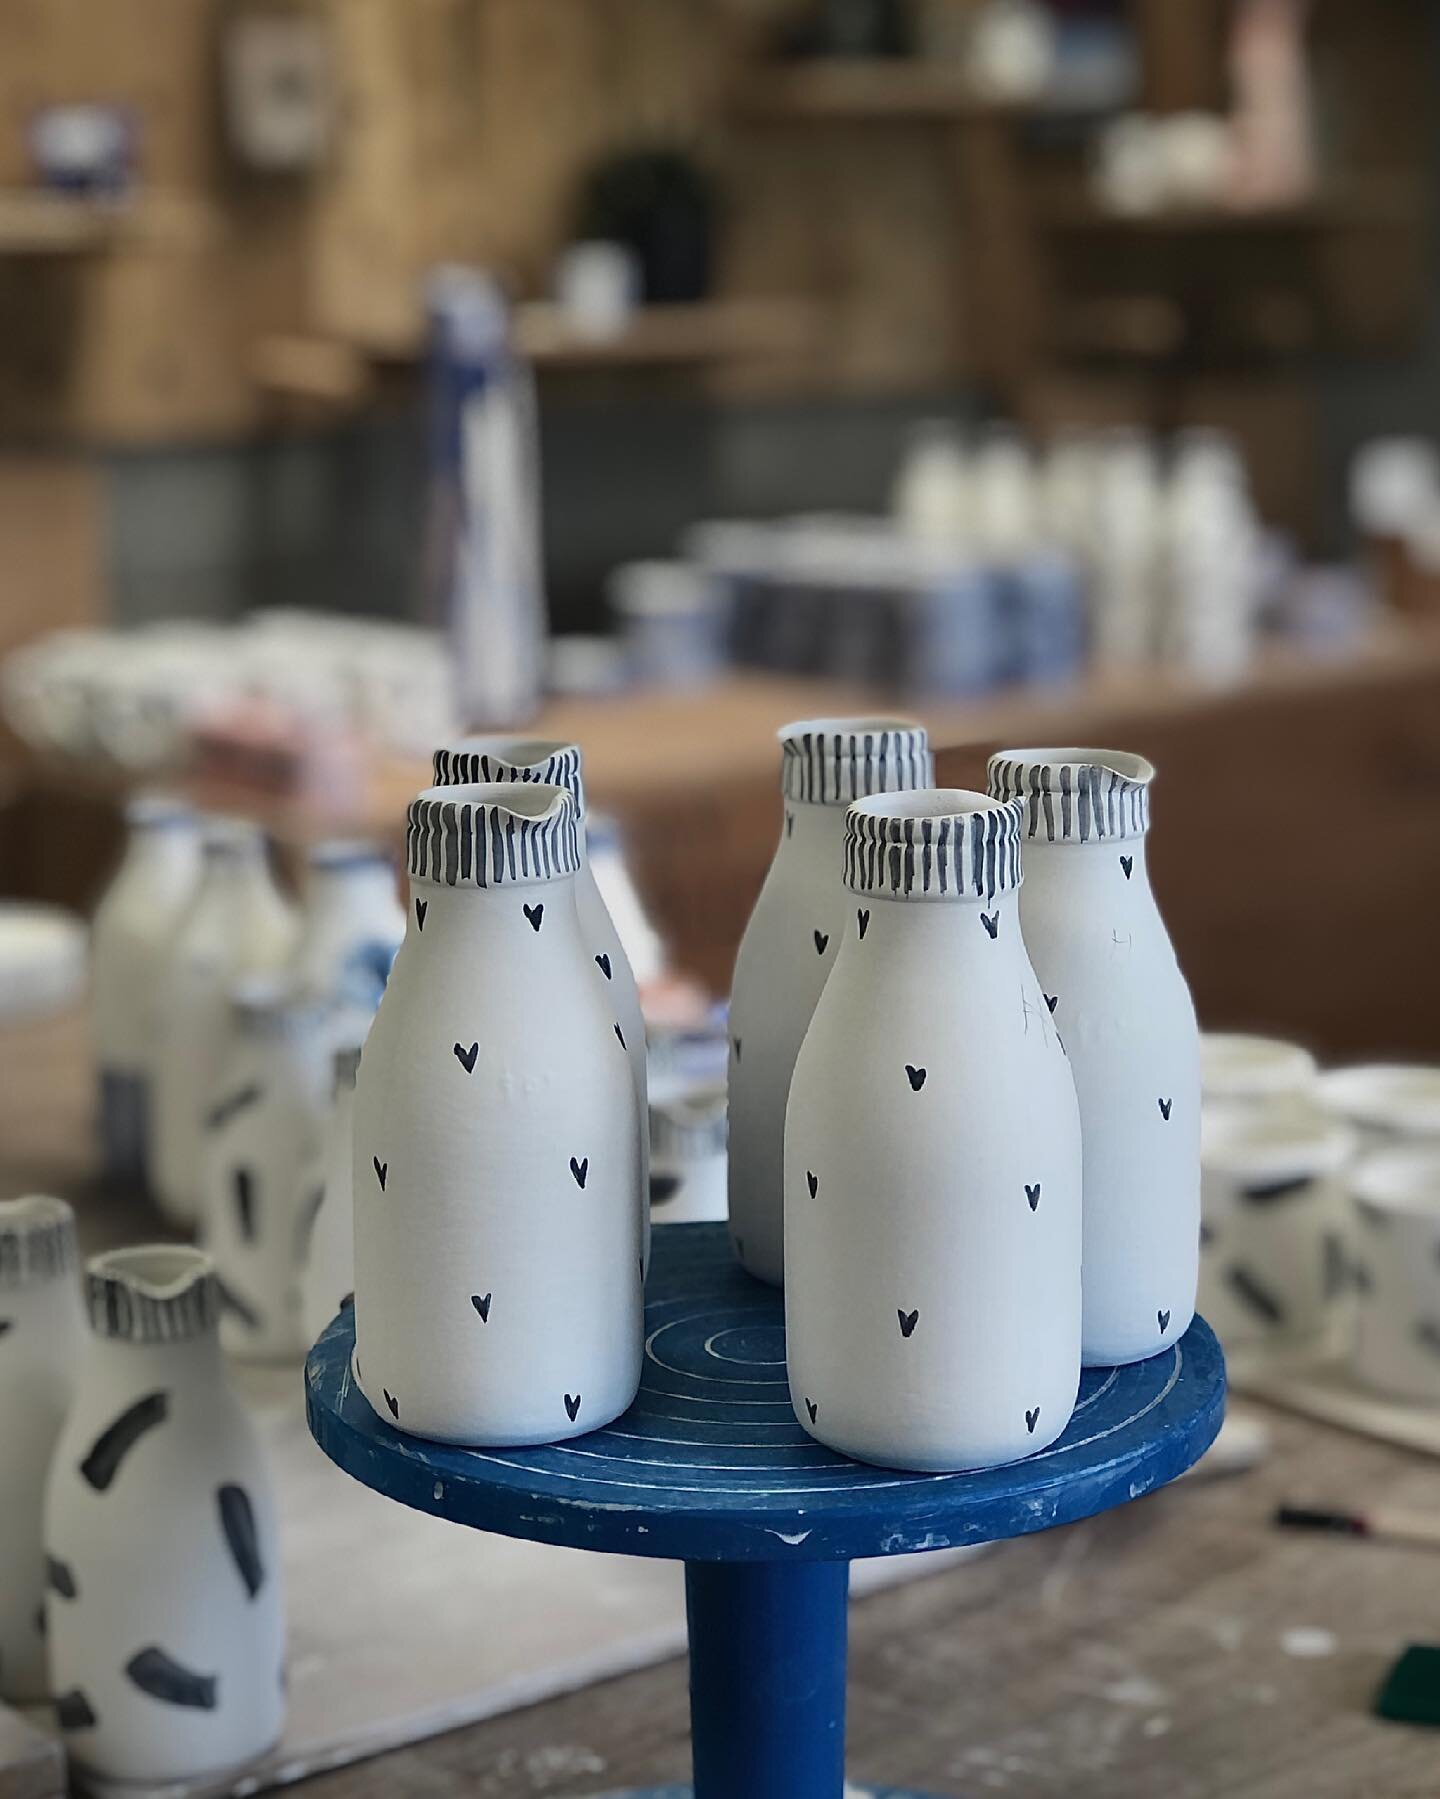 Lots of little hearts in the studio 💙 once fired these are bound for sunny Bangor  @doodleandboom #rebeccakillenceramics #shopsmall #shopindependent #handmadeceramics #makersmovement #makersgonnamake